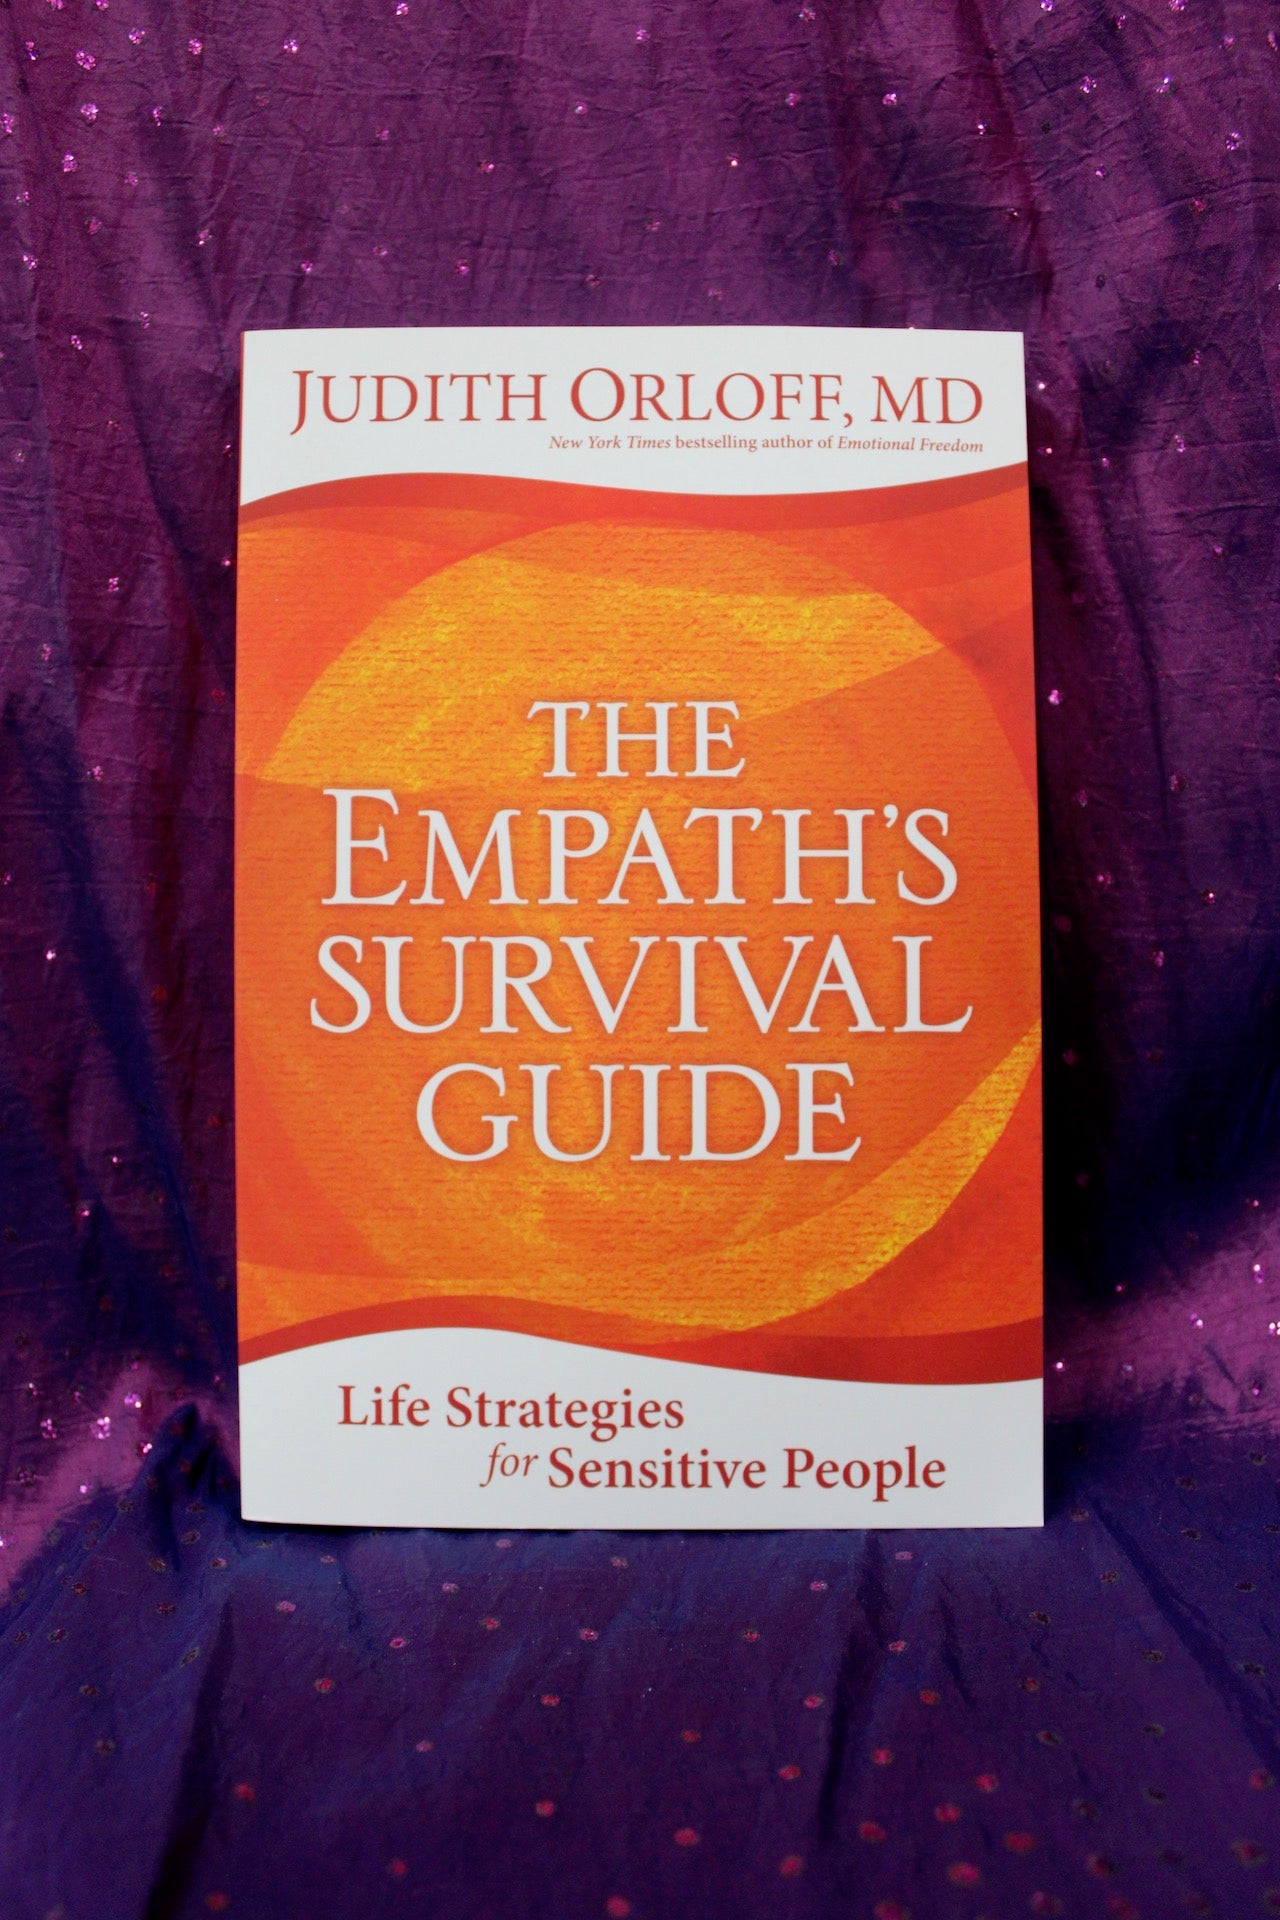 The Empath's Survival Guide, Life Strategies for Sensitive People; Judith Orloff